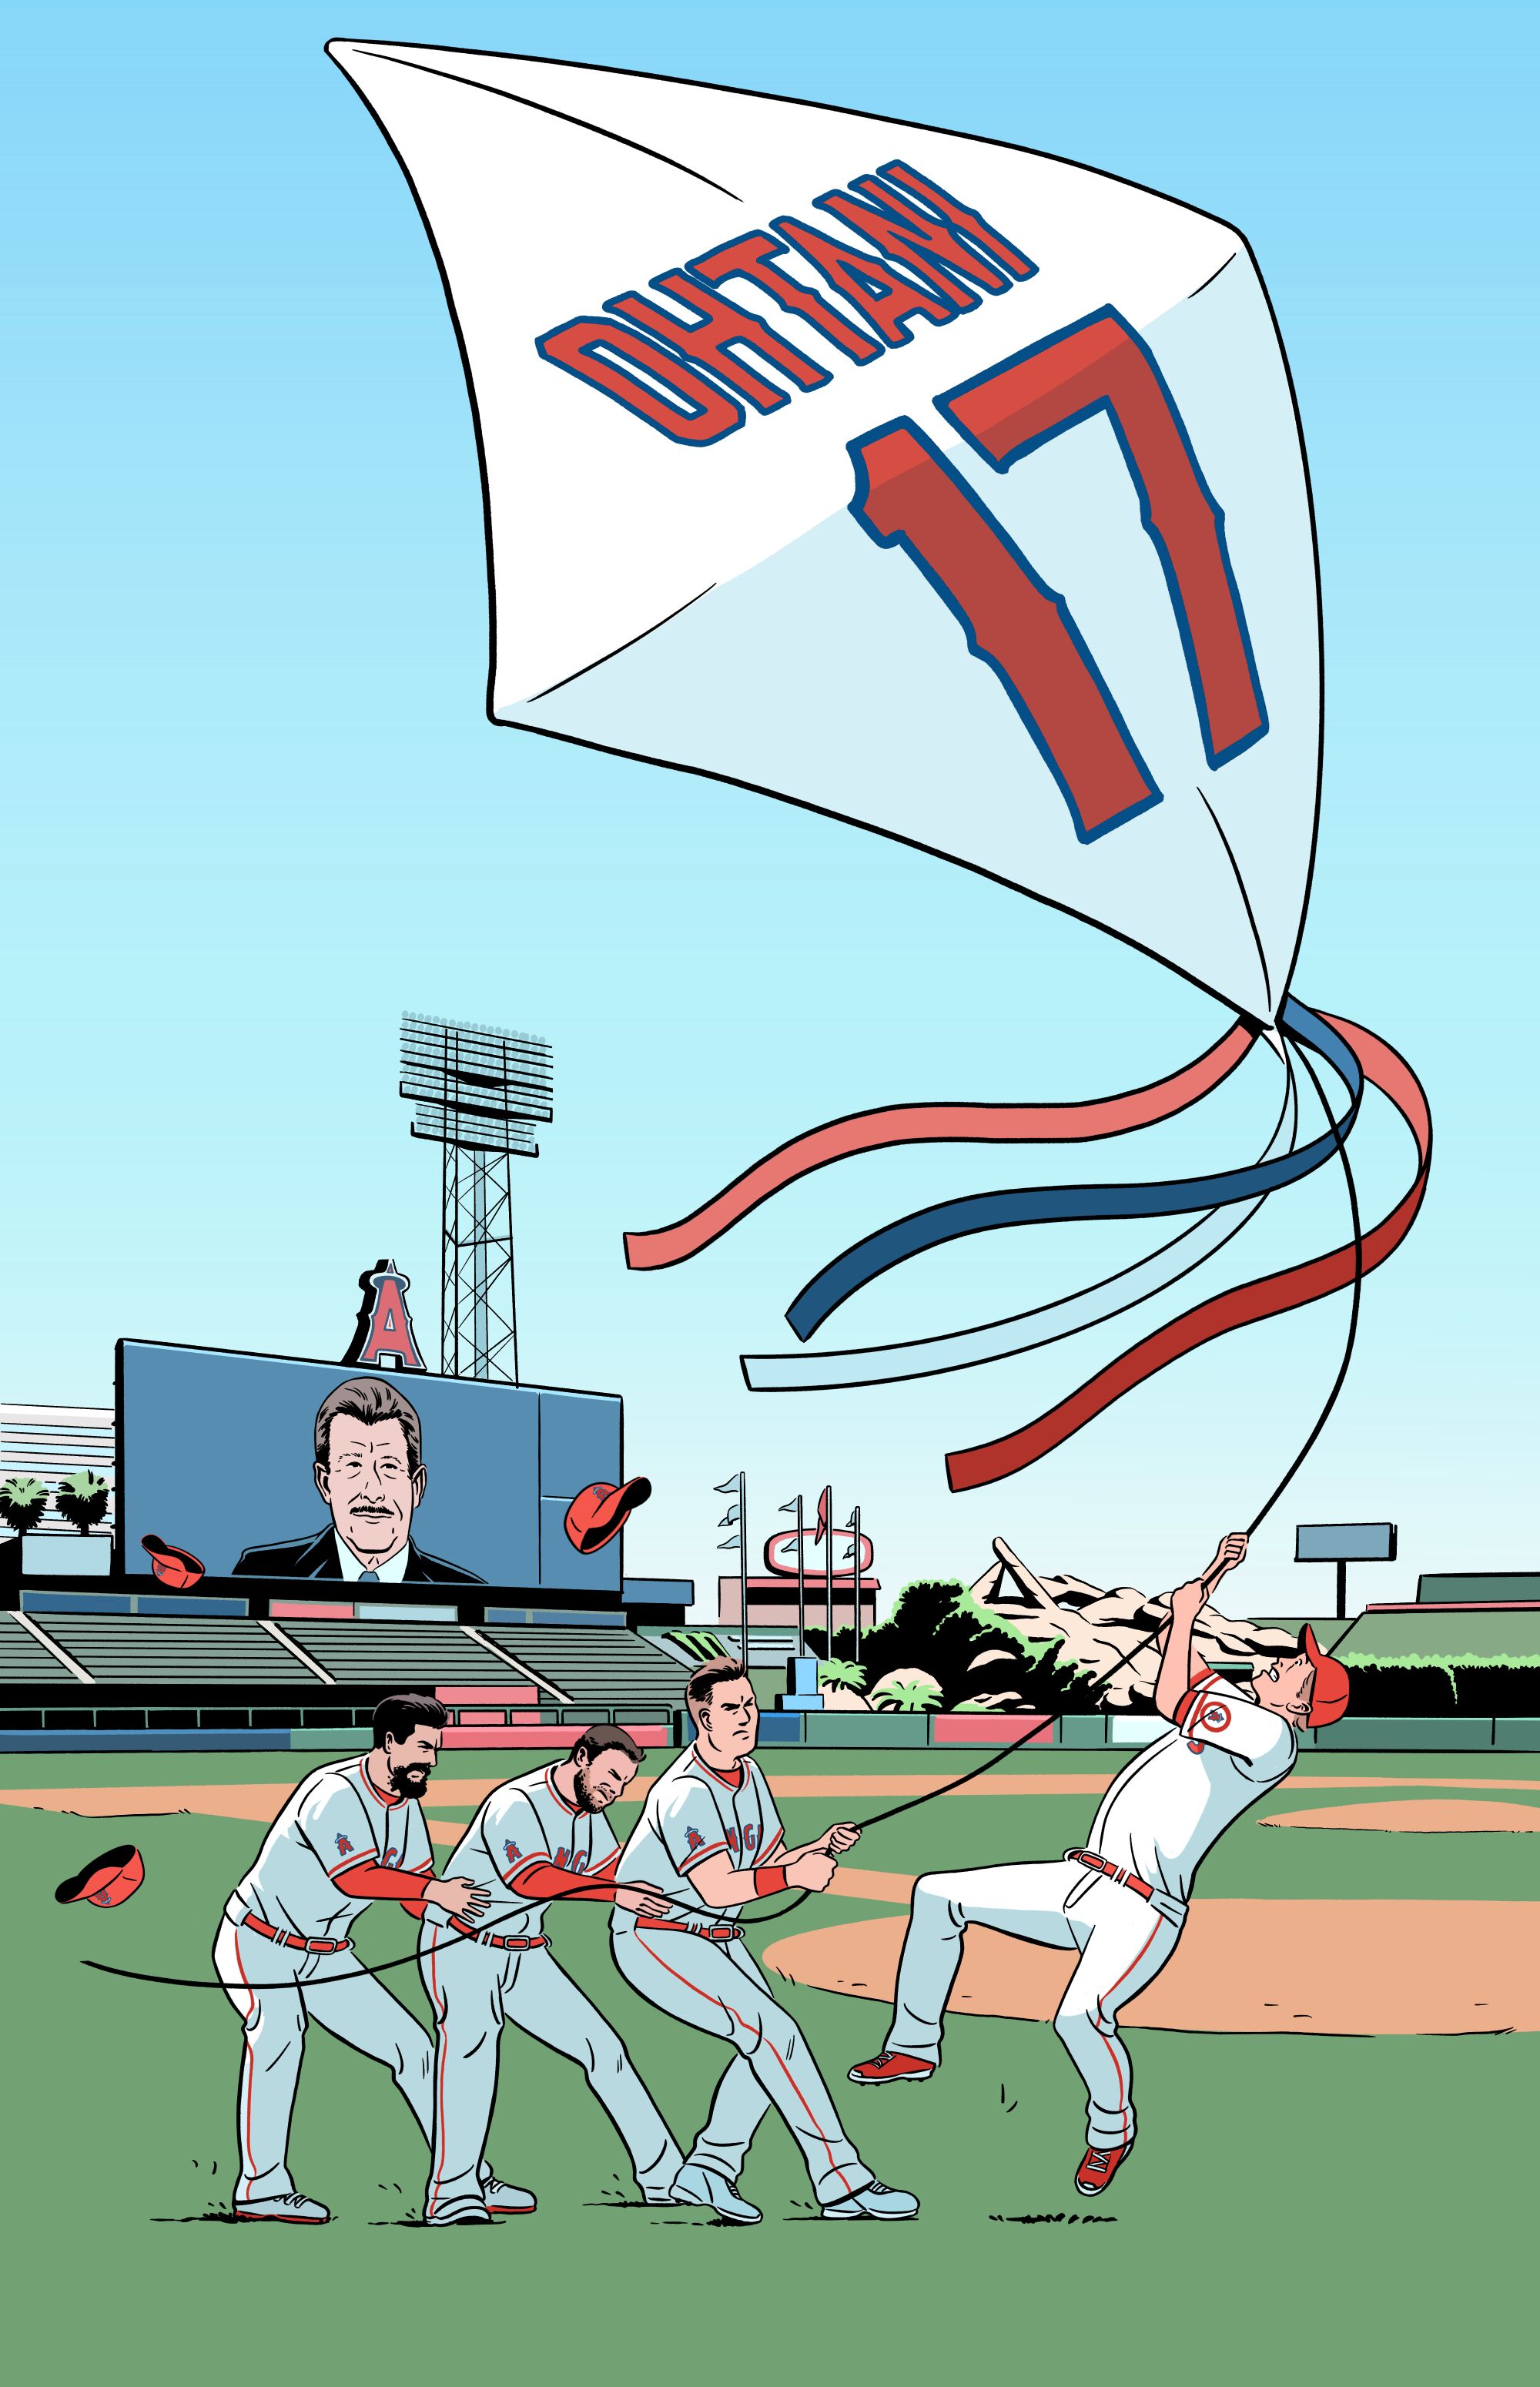 Illustration of four Angels players holding onto a giant kite with Ohtani's name and #17 on it to keep it from blowing away